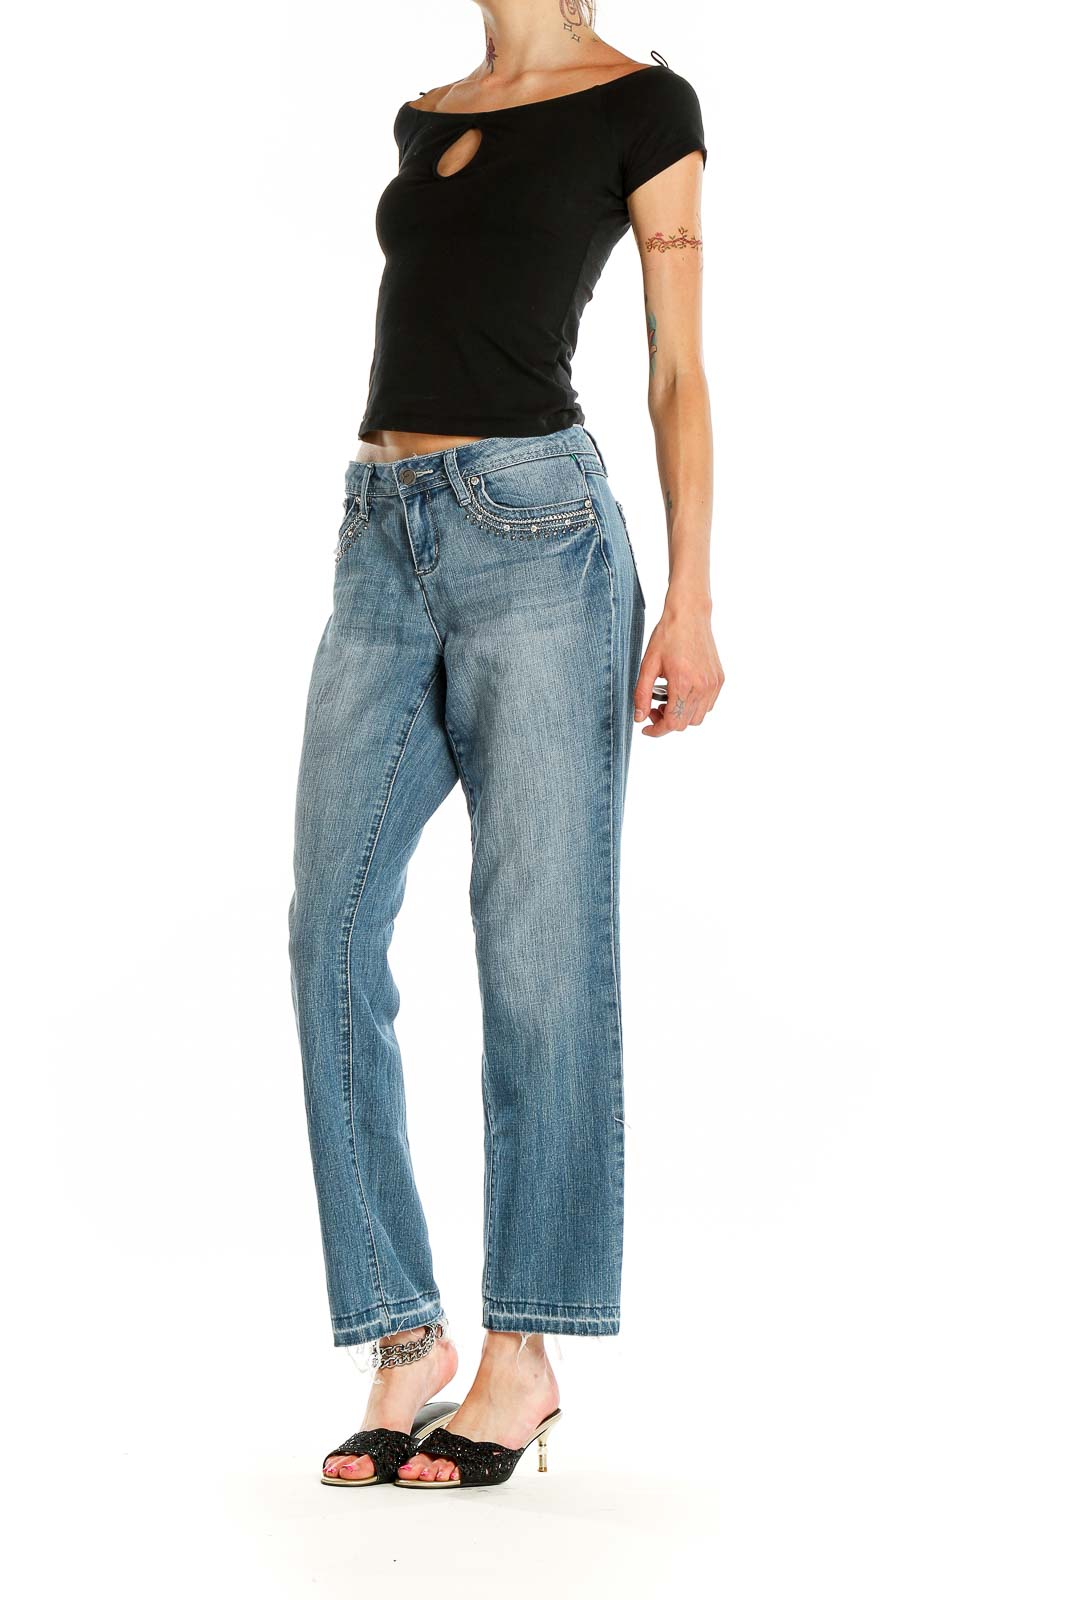 Earl Jeans, Jeans, Earl Embroidered Skinny Ankle Jeans